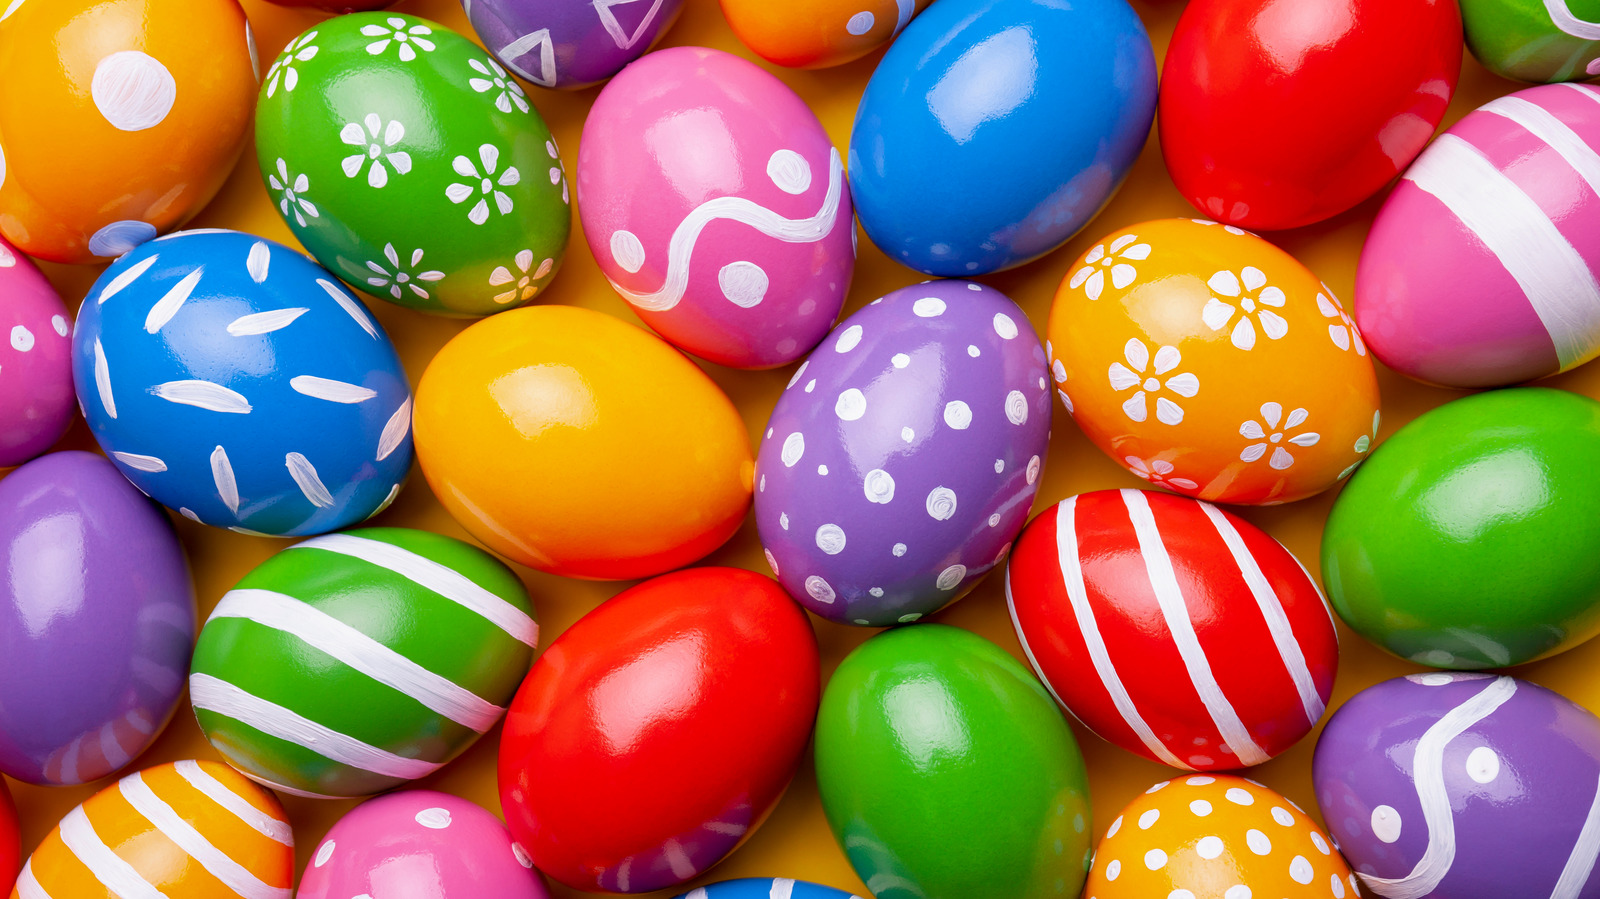 The Pagan Origin Of Painted Easter Eggs